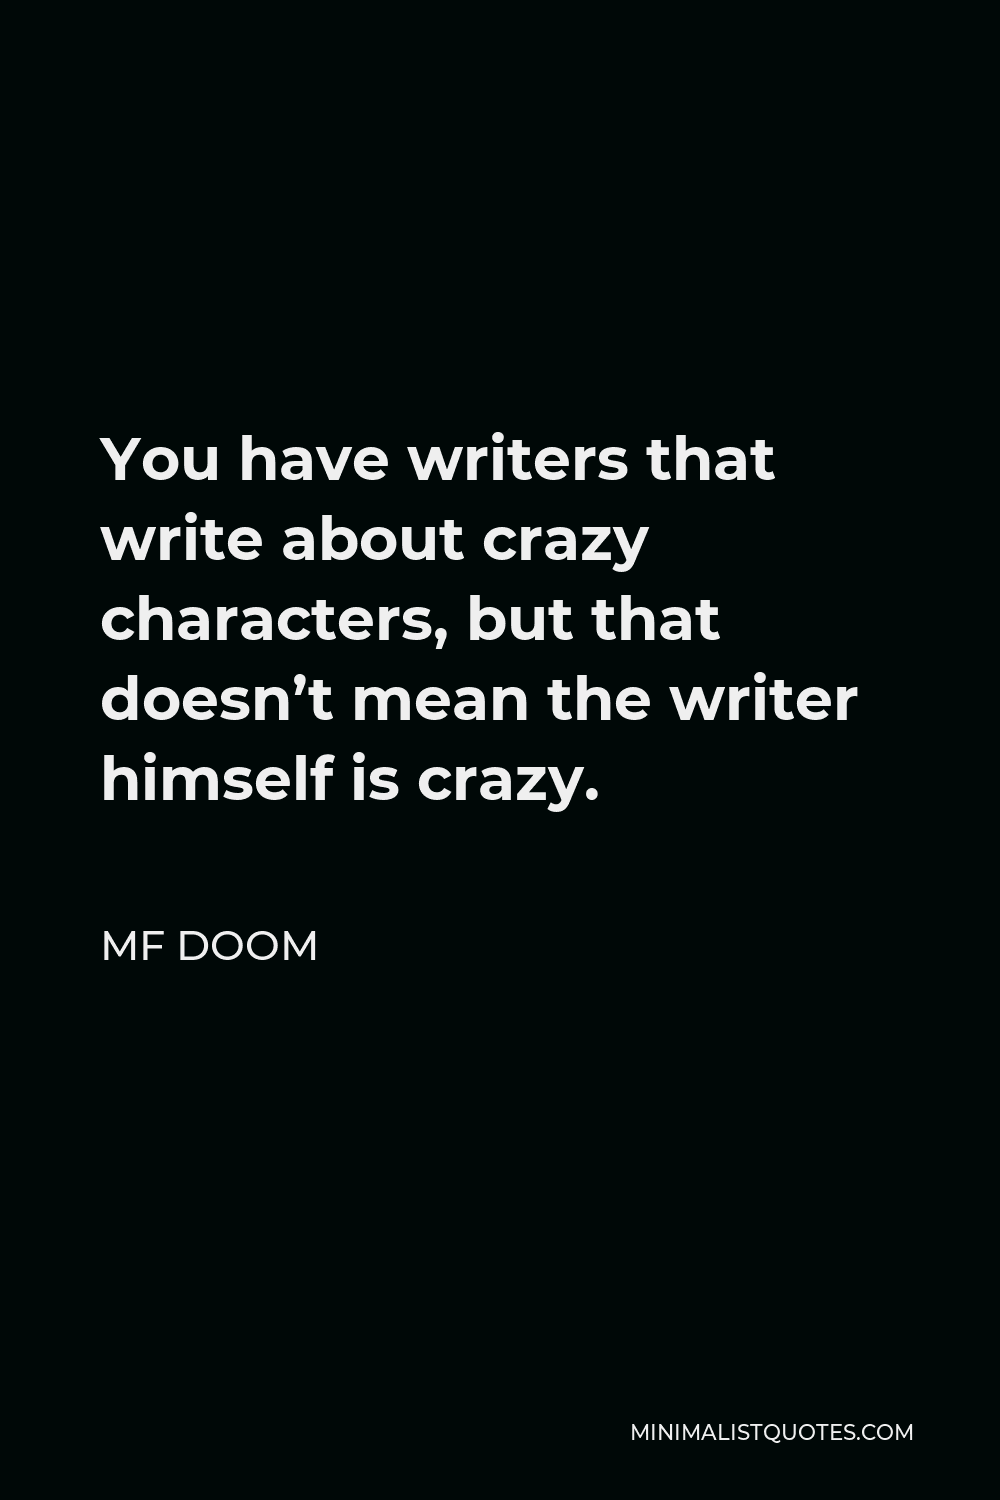 MF DOOM Quote - You have writers that write about crazy characters, but that doesn’t mean the writer himself is crazy.